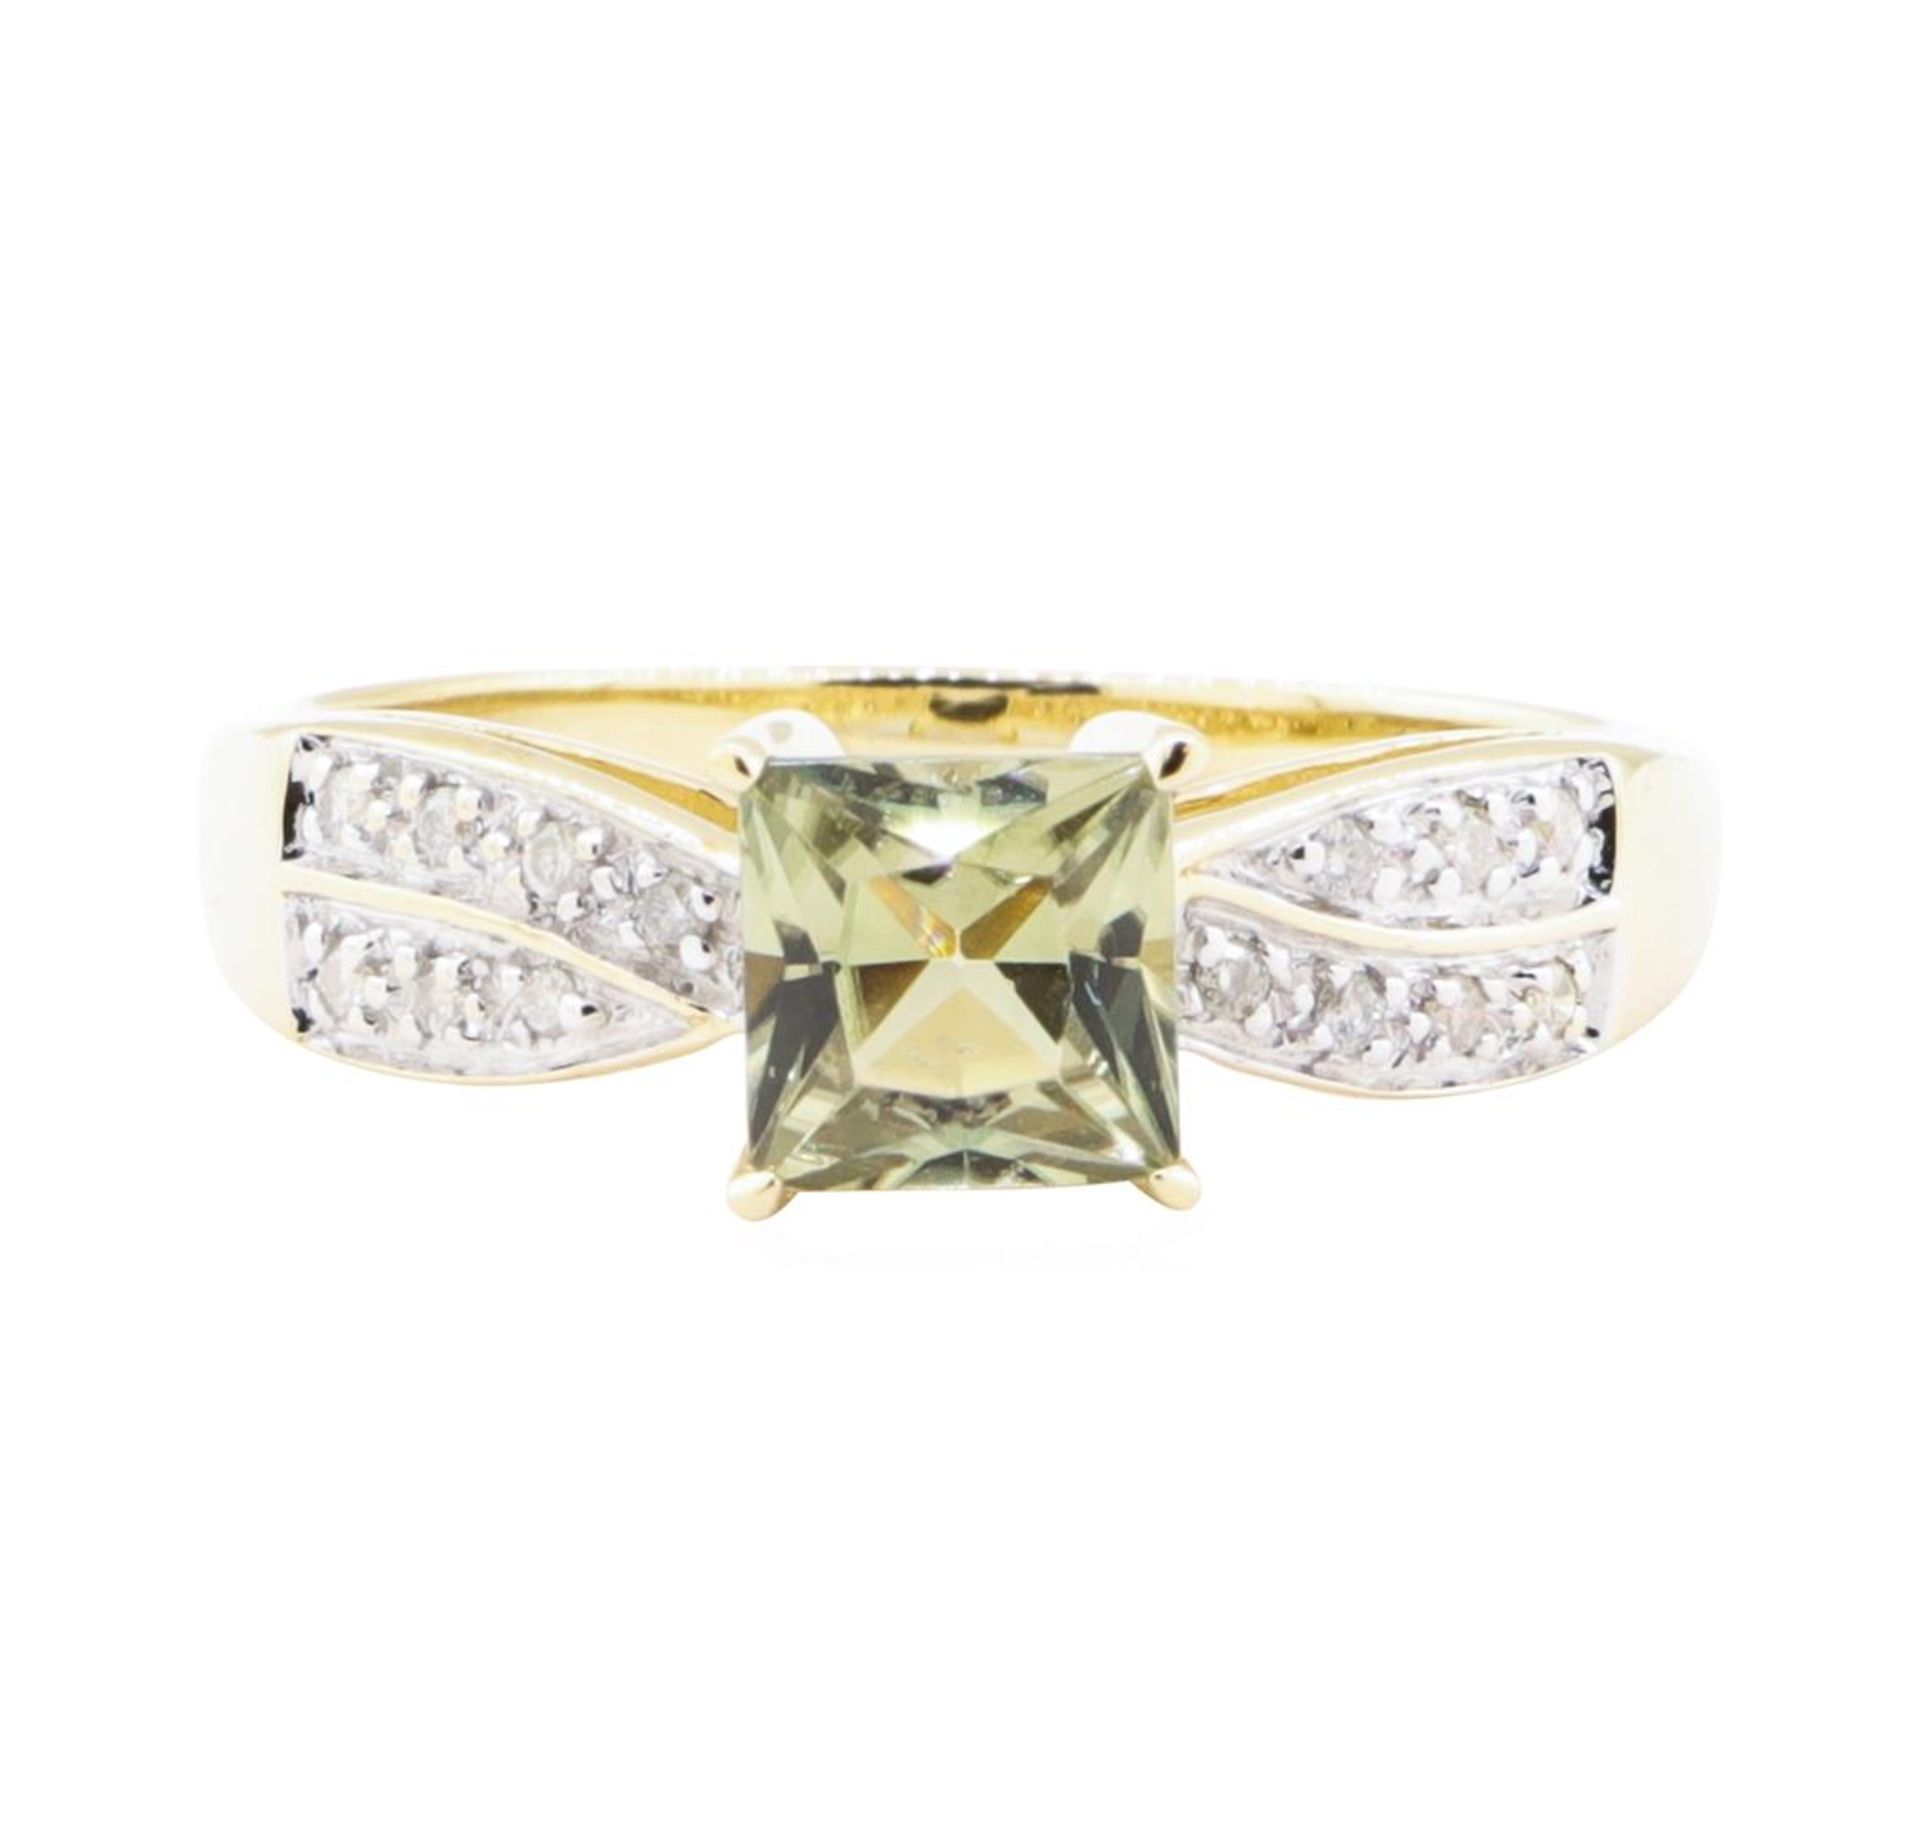 2.12 ctw Zultanite And Diamond Ring - 14KT Yellow Gold - Image 2 of 5